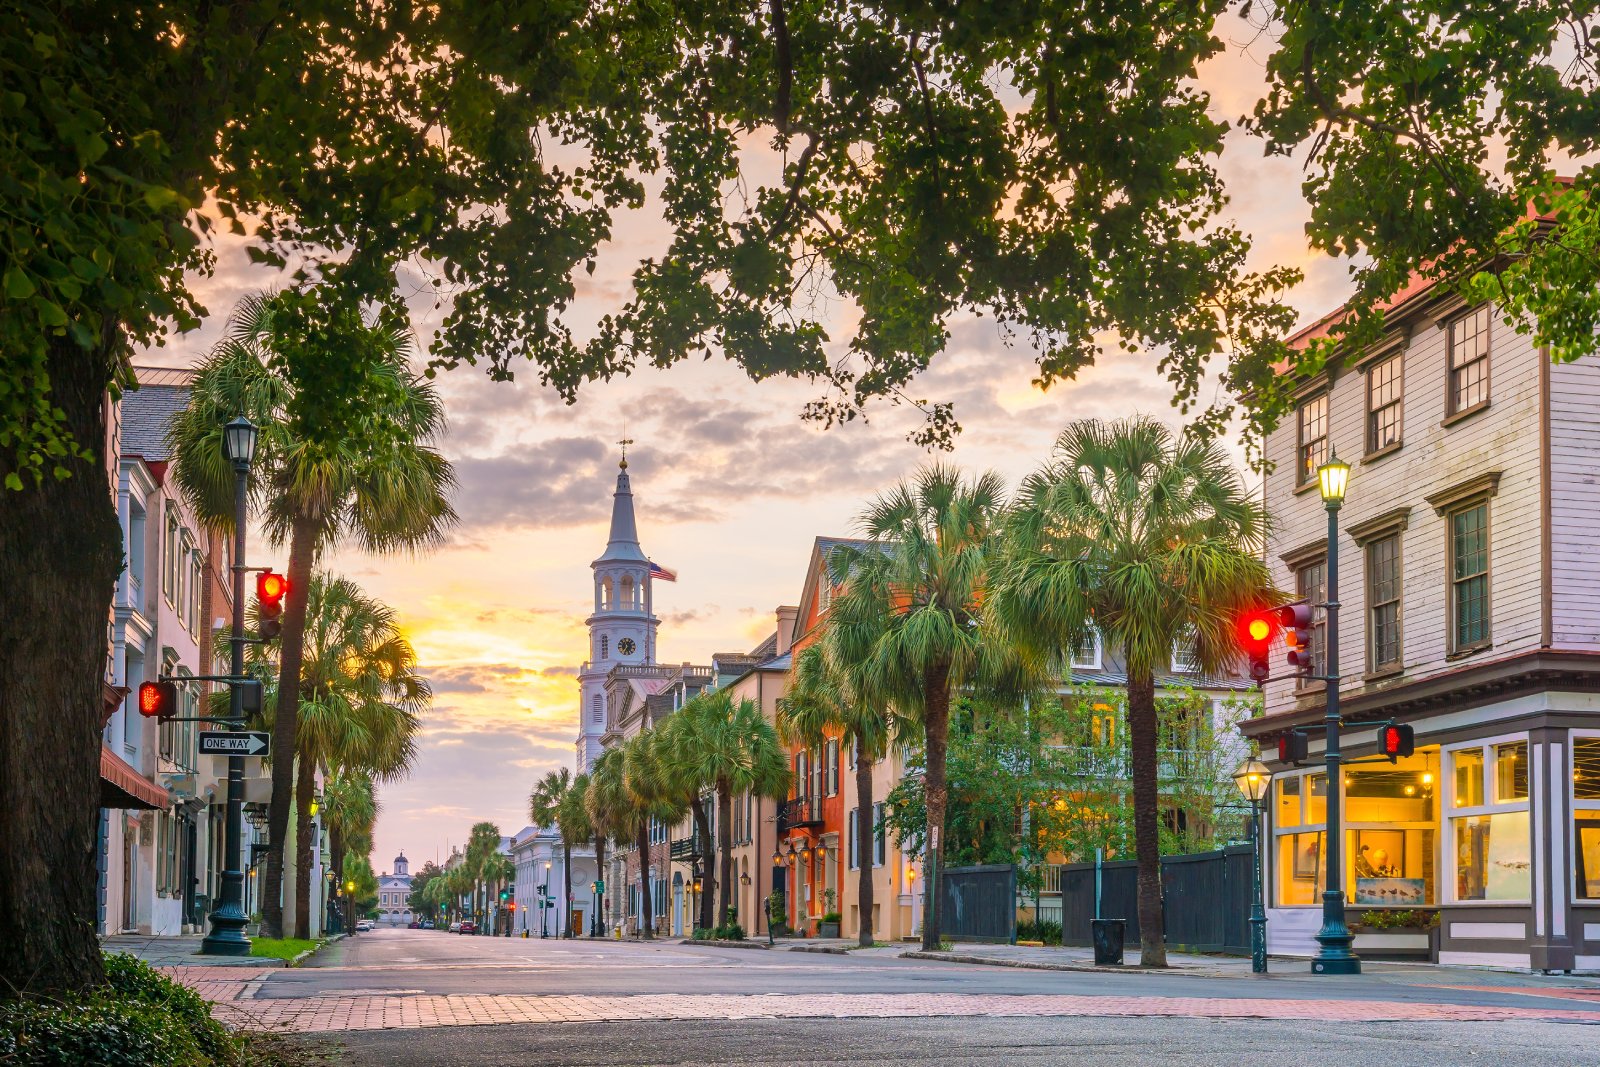 <p>Tourism in South Carolina brings in approximately $22.6 billion, with beach destinations and historic Charleston leading the way.</p>